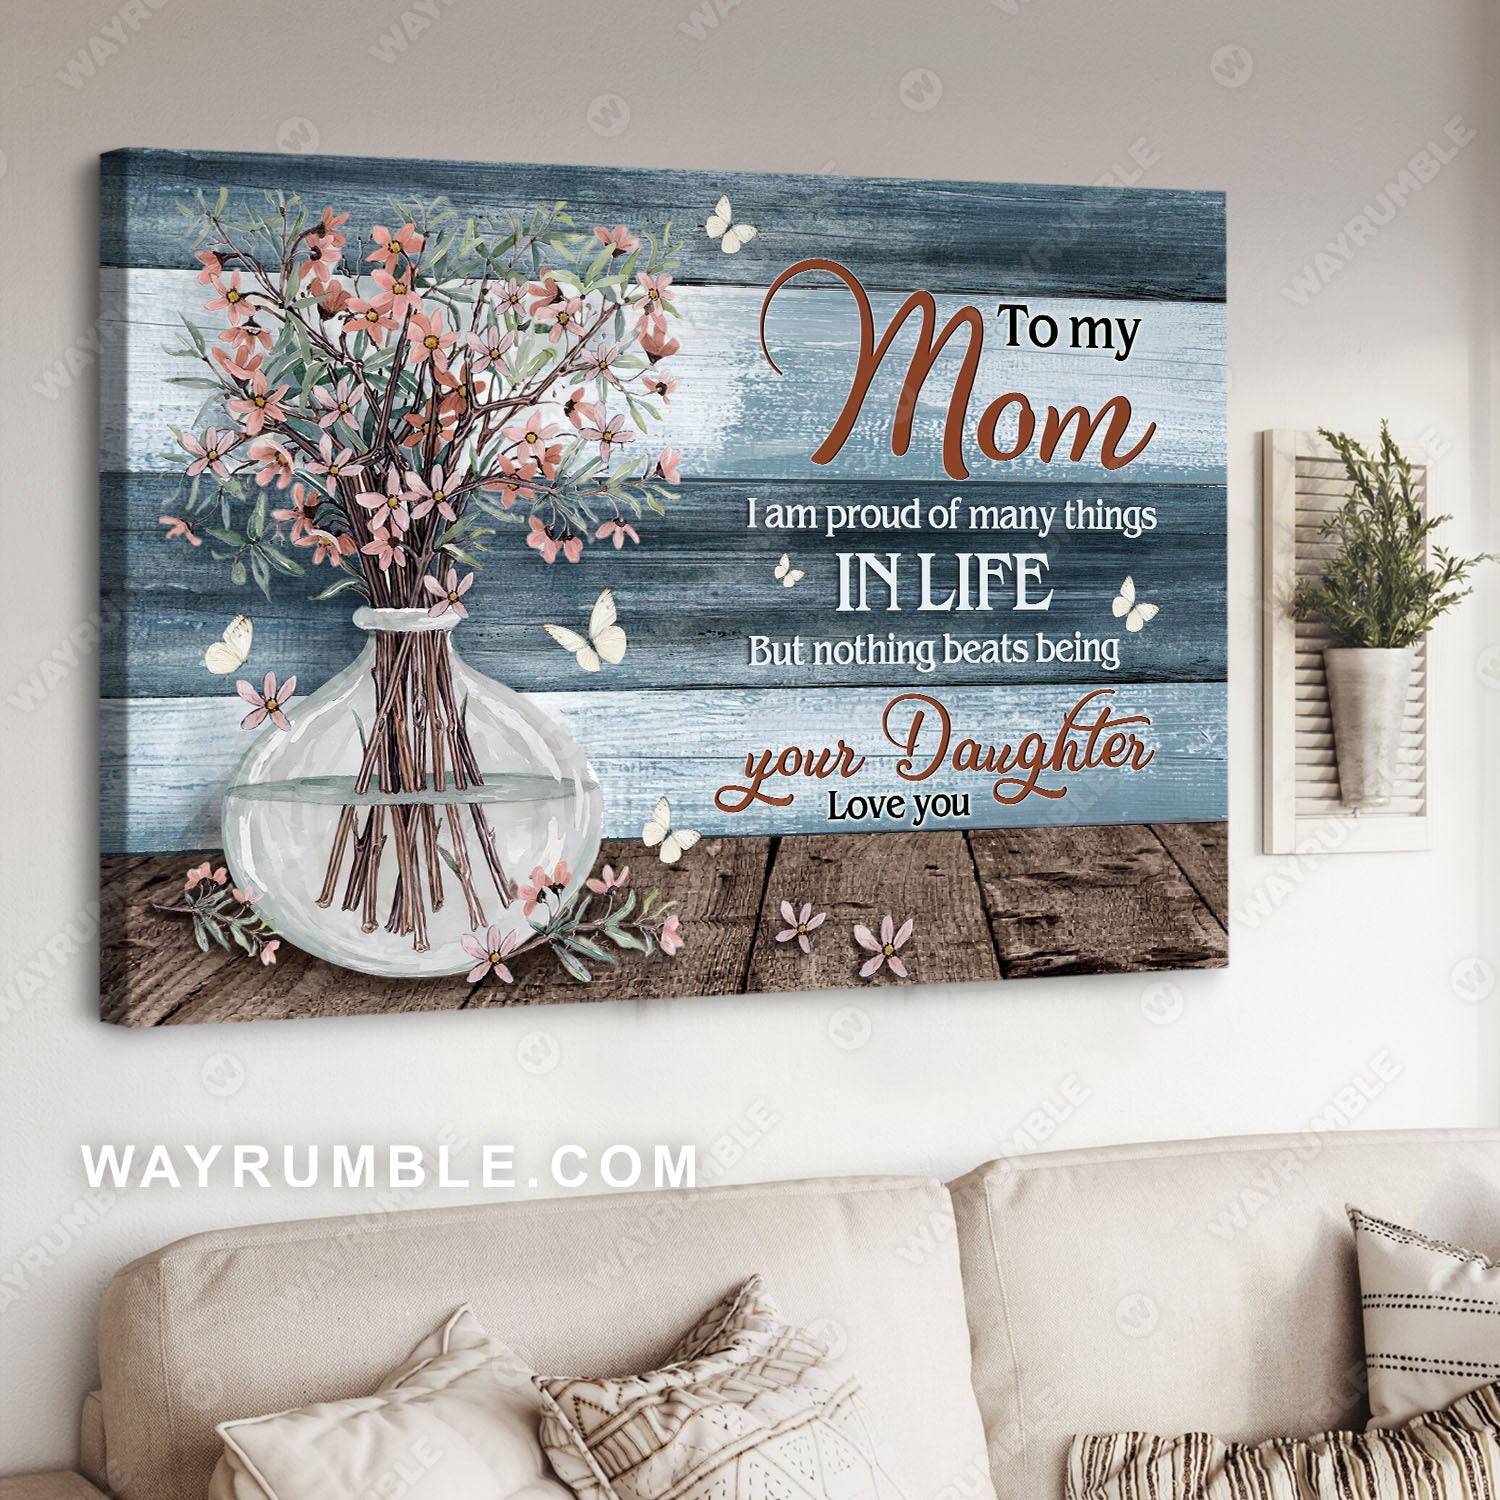 Daughter to mom, Baby flower vase, Still life painting, I am proud of being your daughter - Family Landscape Canvas Prints, Wall Art